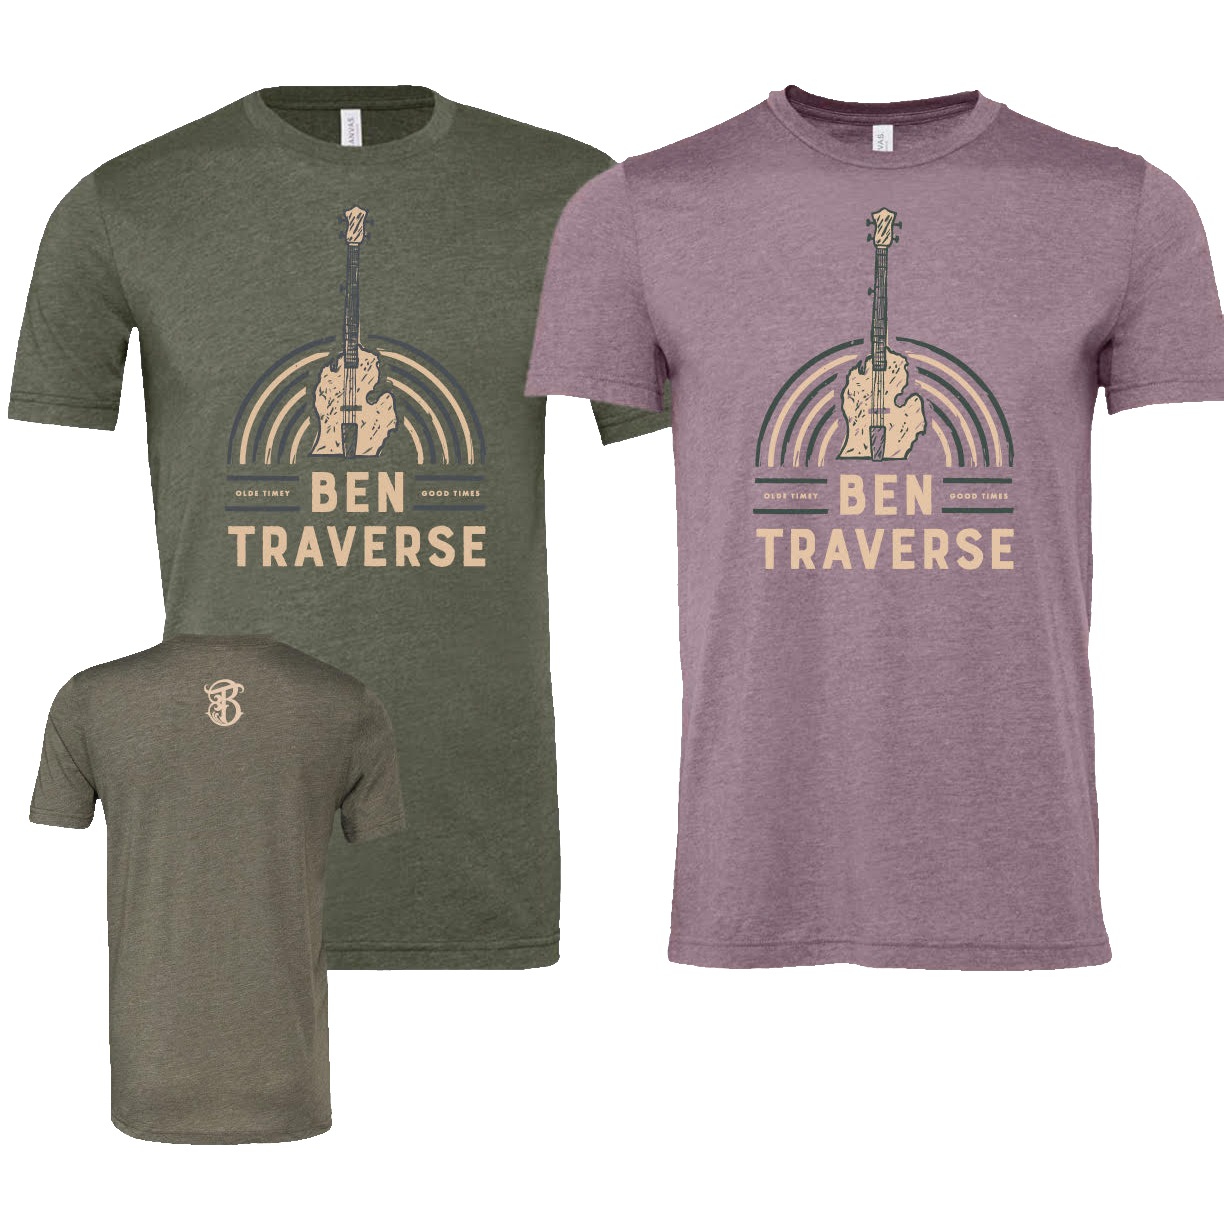 New Ben Traverse t-shirt design featuring Michigan's Lower Peninsula as a banjo with the phrase "olde timey good times, ben traverse"